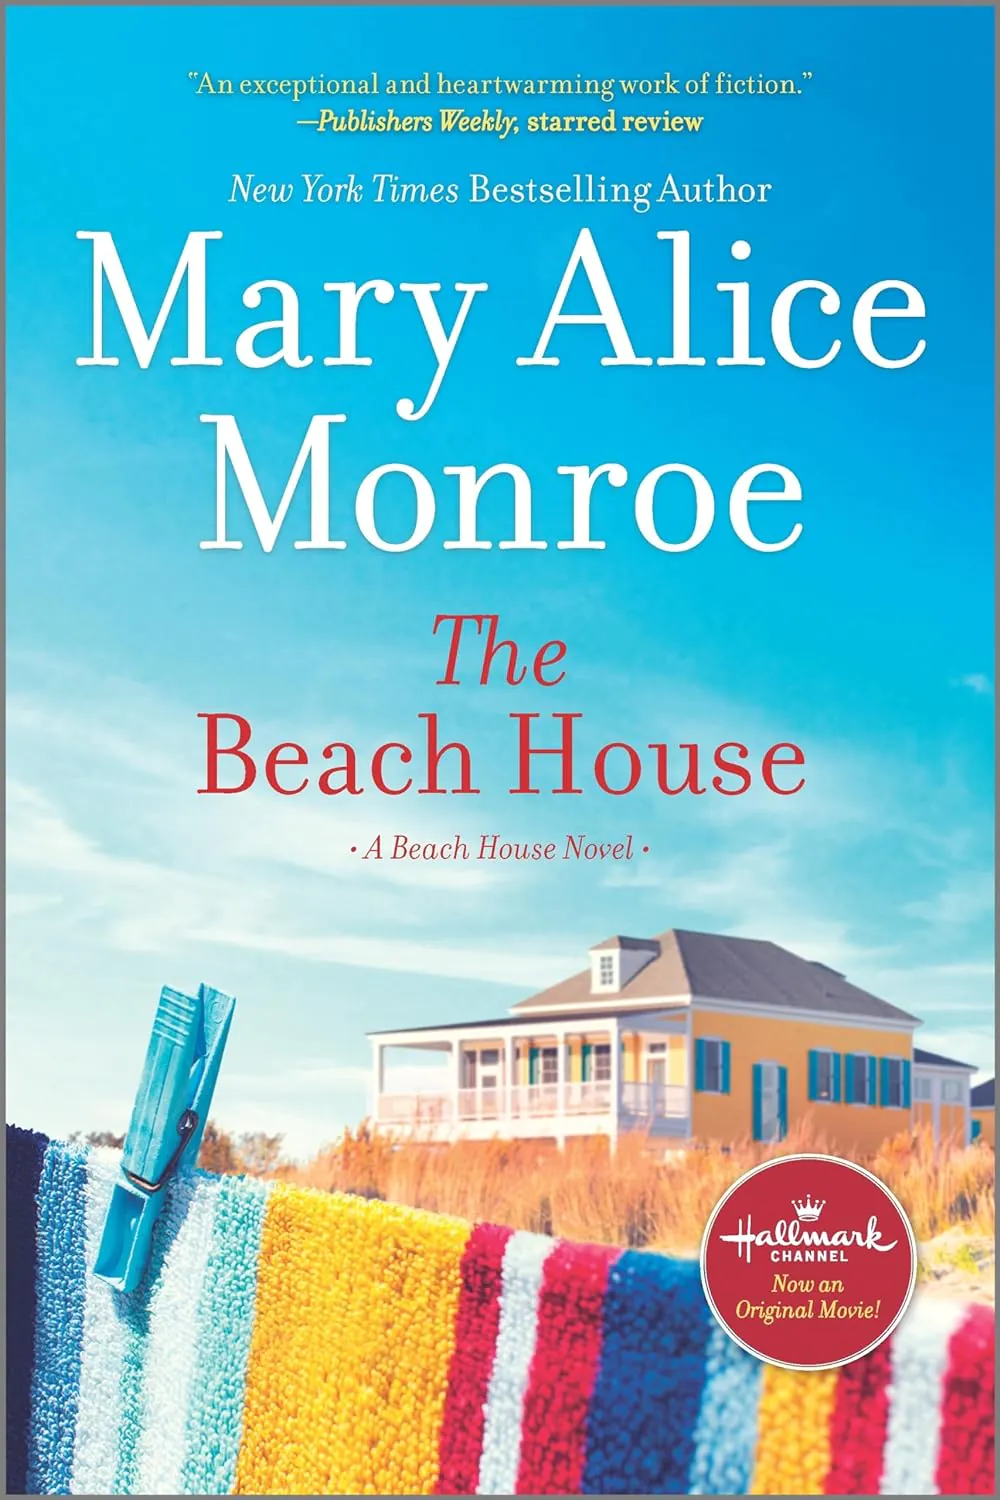 The Beach House by Mary Alice Monroe book cover